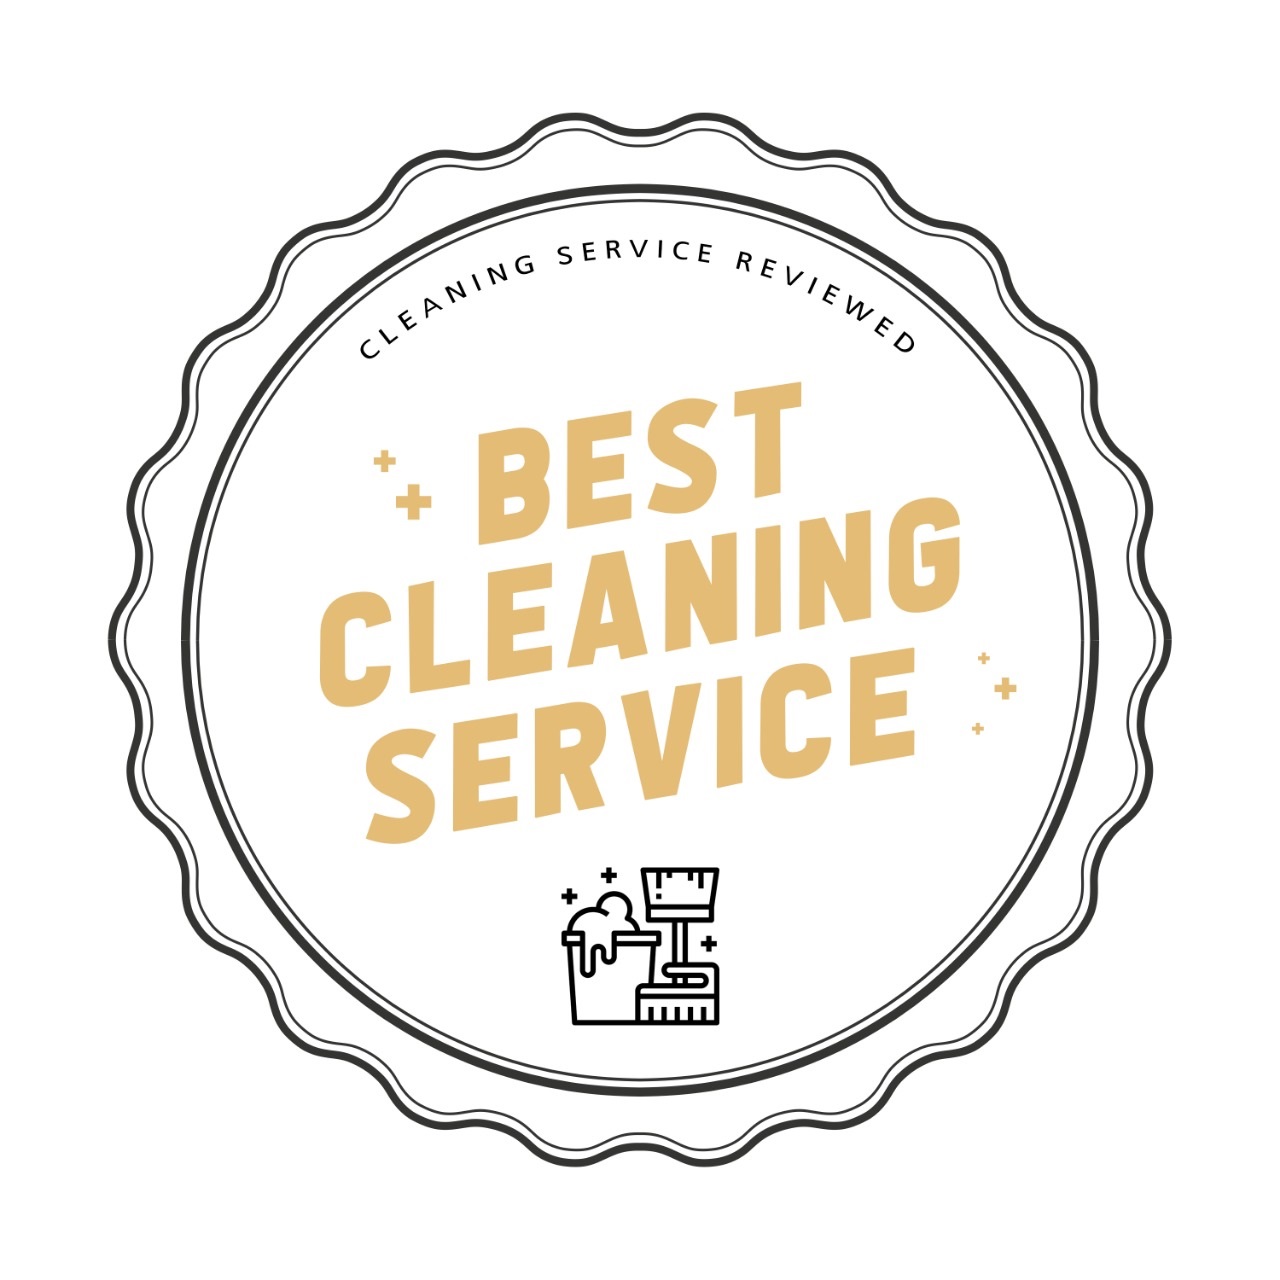 Best Cleaning Service Badge